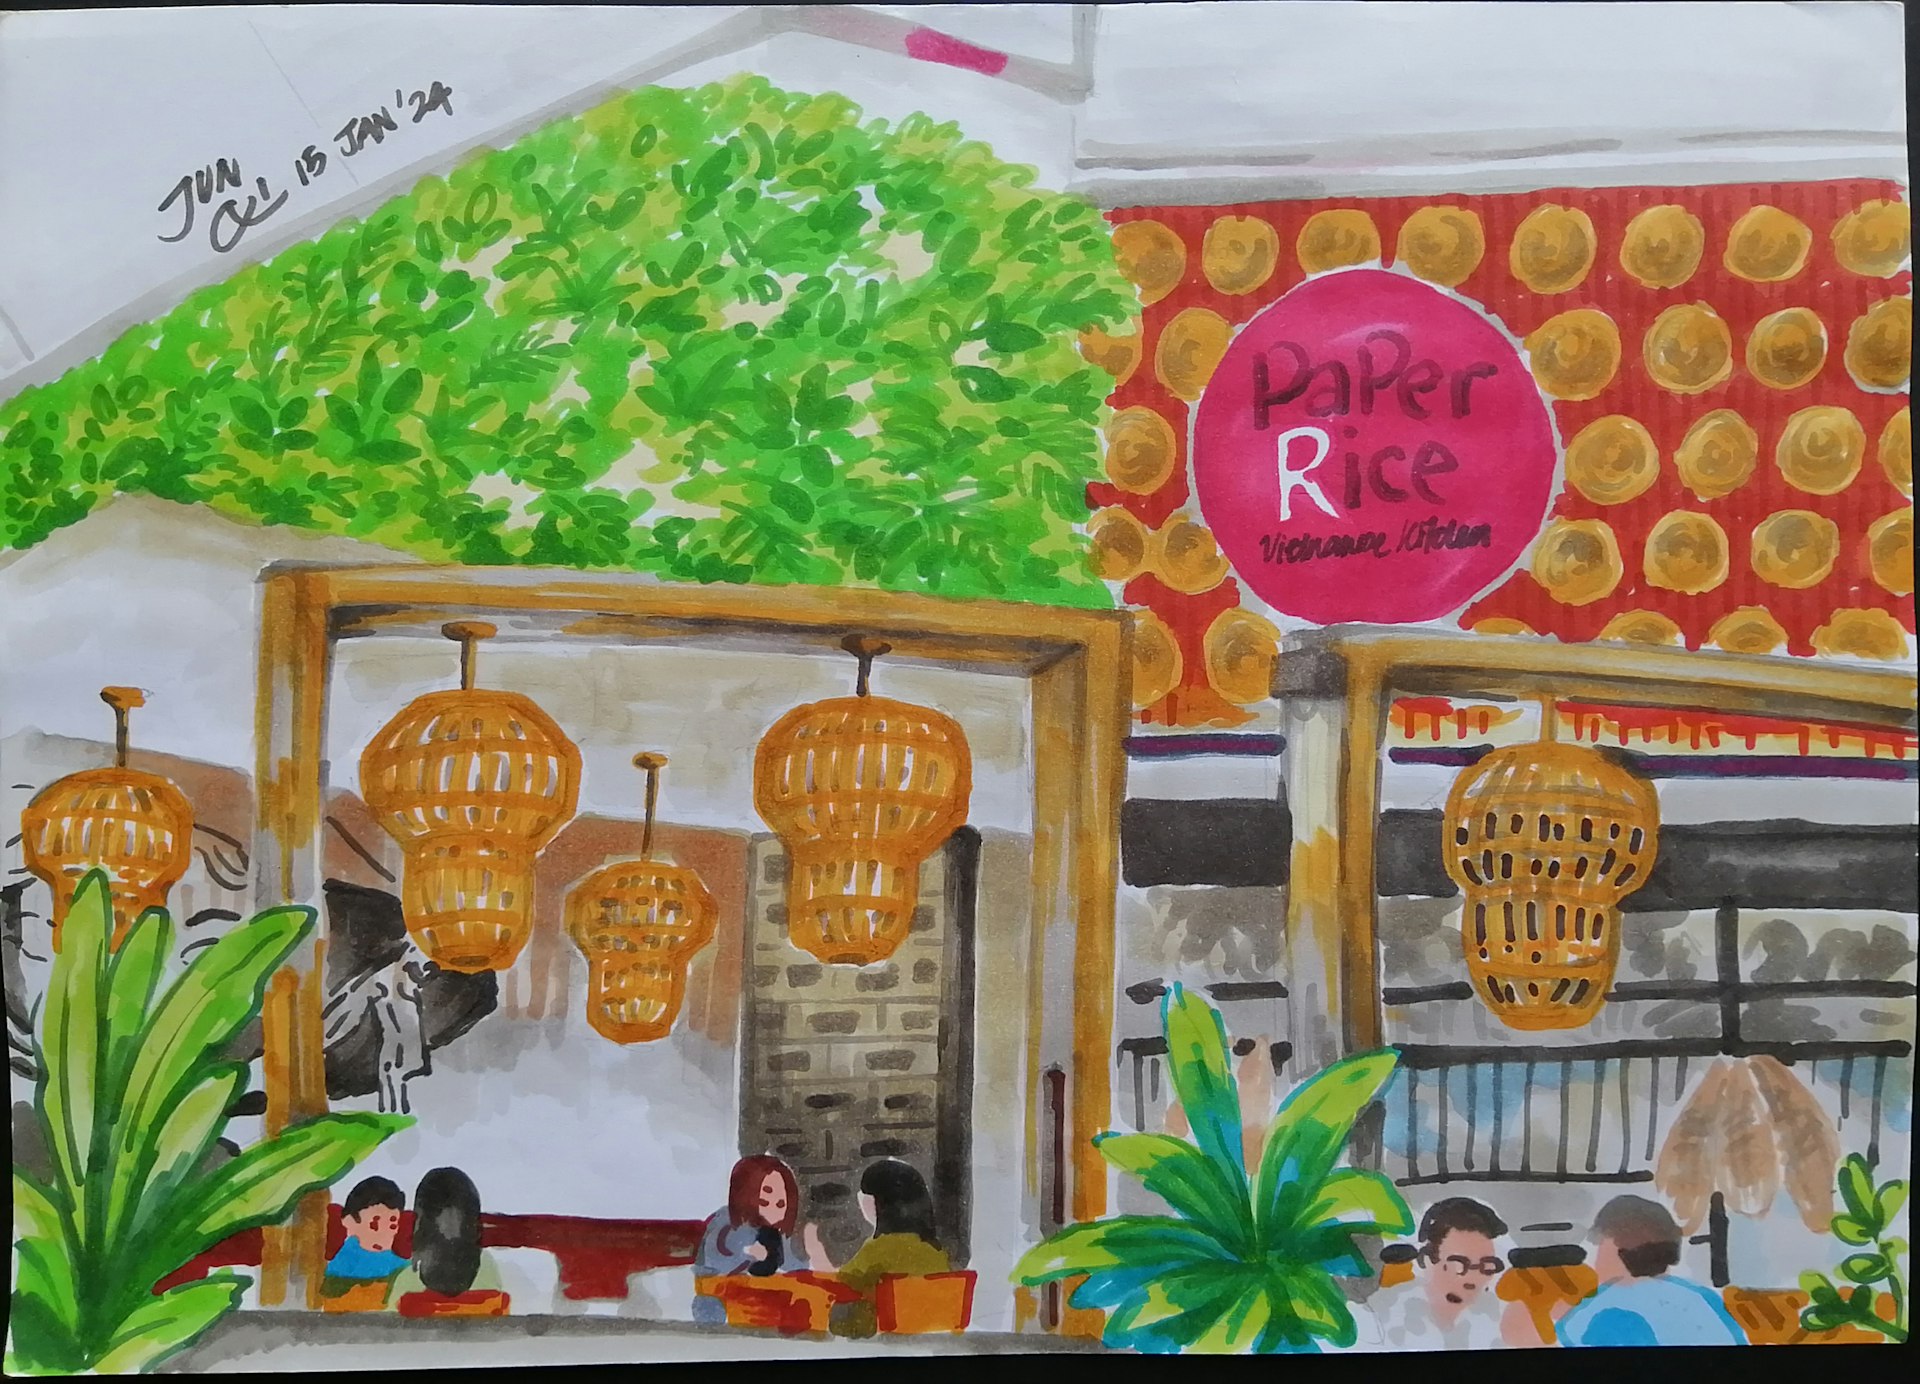 Sketch of the interior of Paper Rice restaurant in Plaza Sing